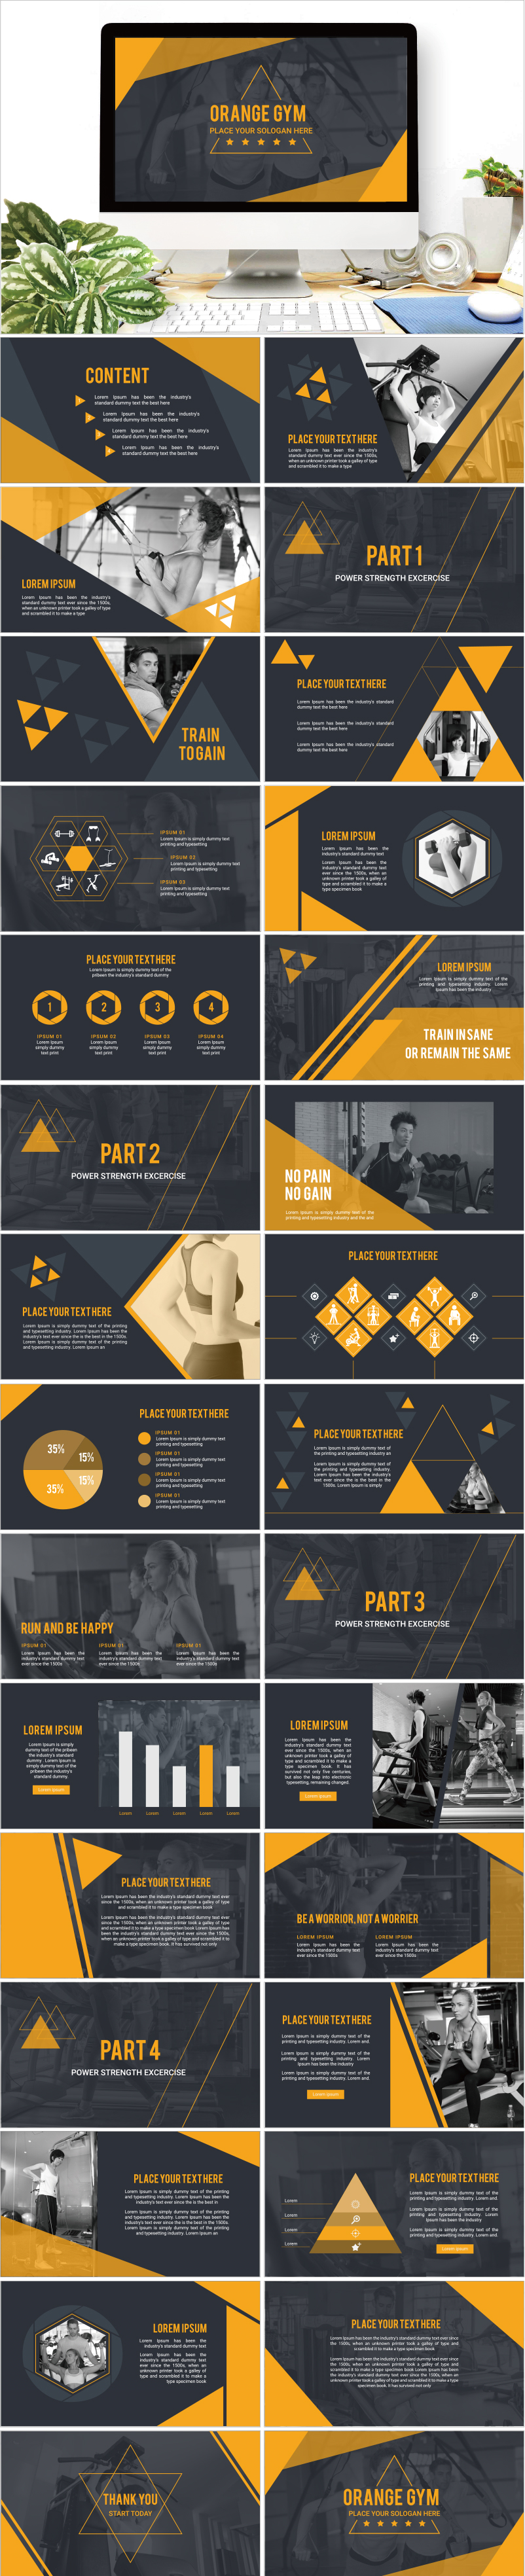 PowerPoint template material vol. 12